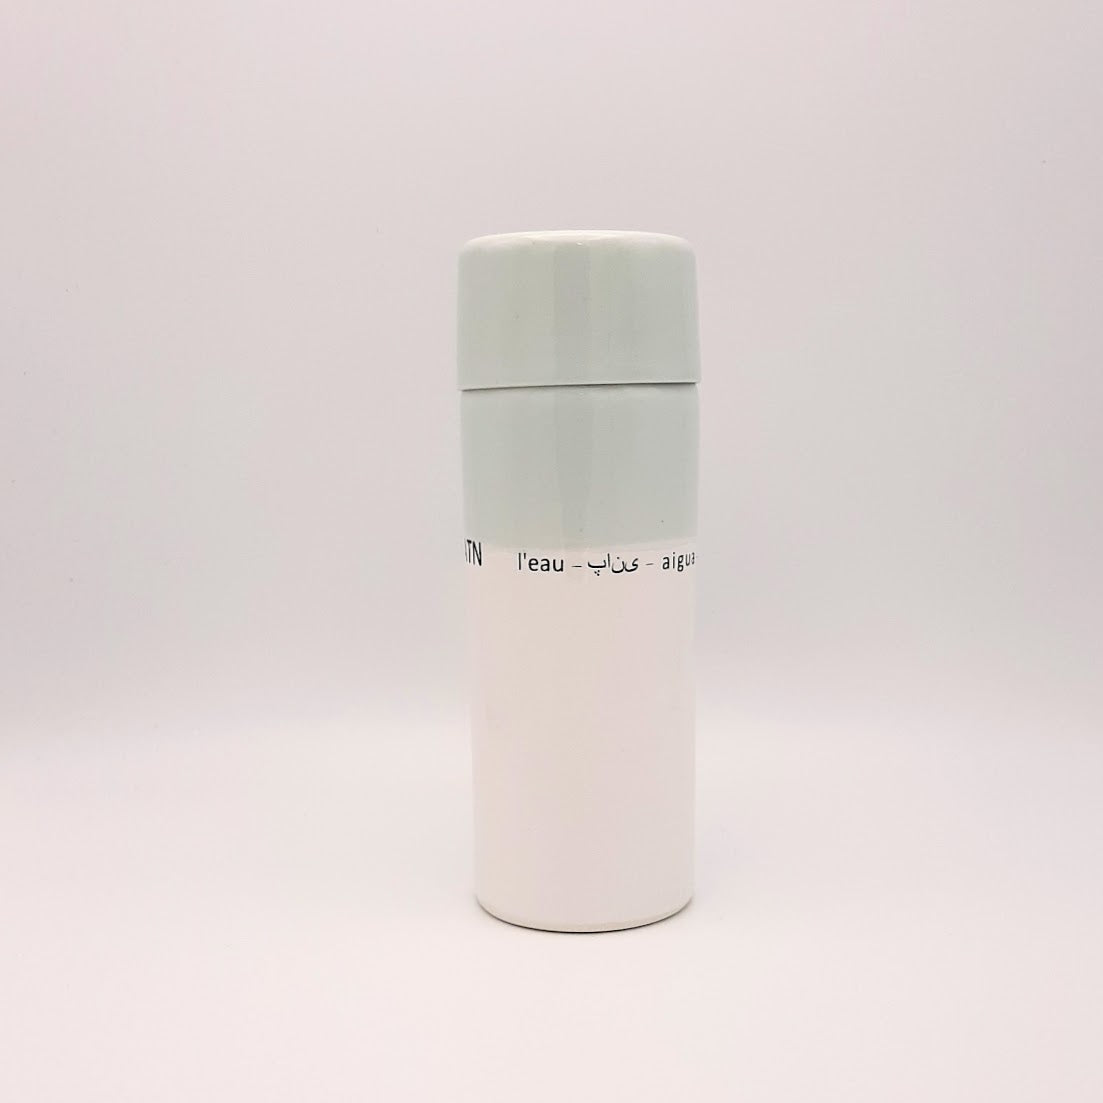 Kaolin - Guðný Magnúsdóttir - H2o WATER KARAFE - are designed in remembrance of the importance of water for all living creatures, the text says water in different languages. WATER - a water bottle in light blue and white glazes. The water bottle comes with a cap.